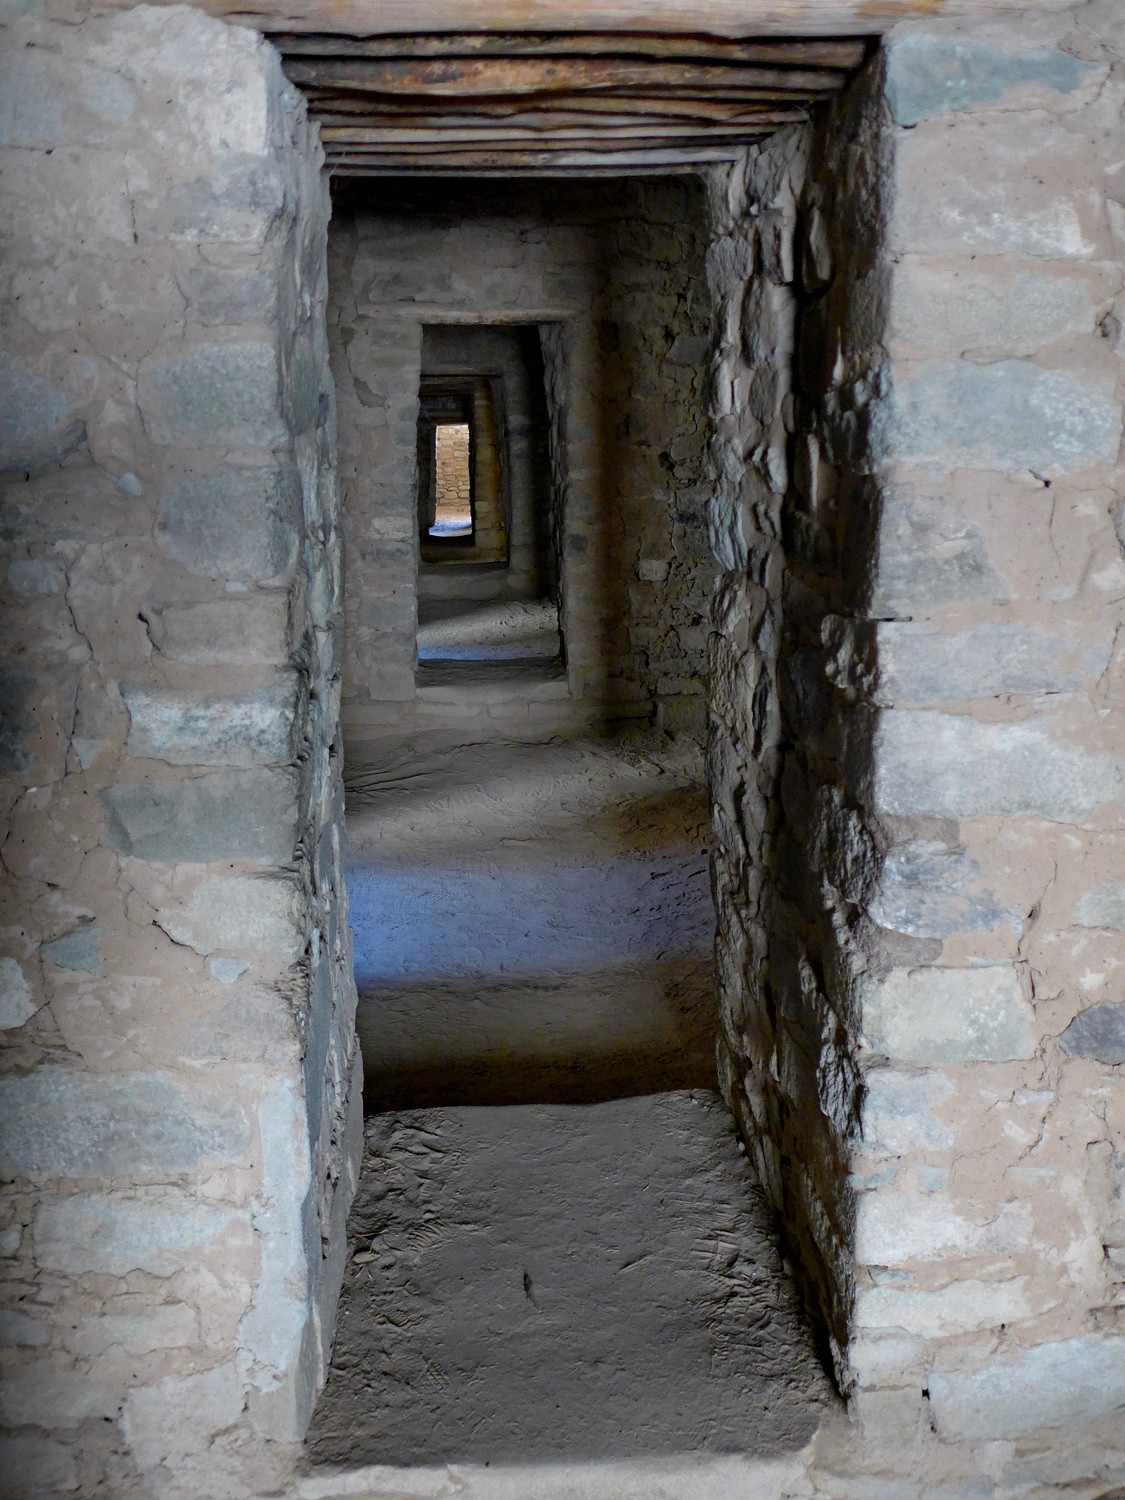 Passage in the Aztec ruins